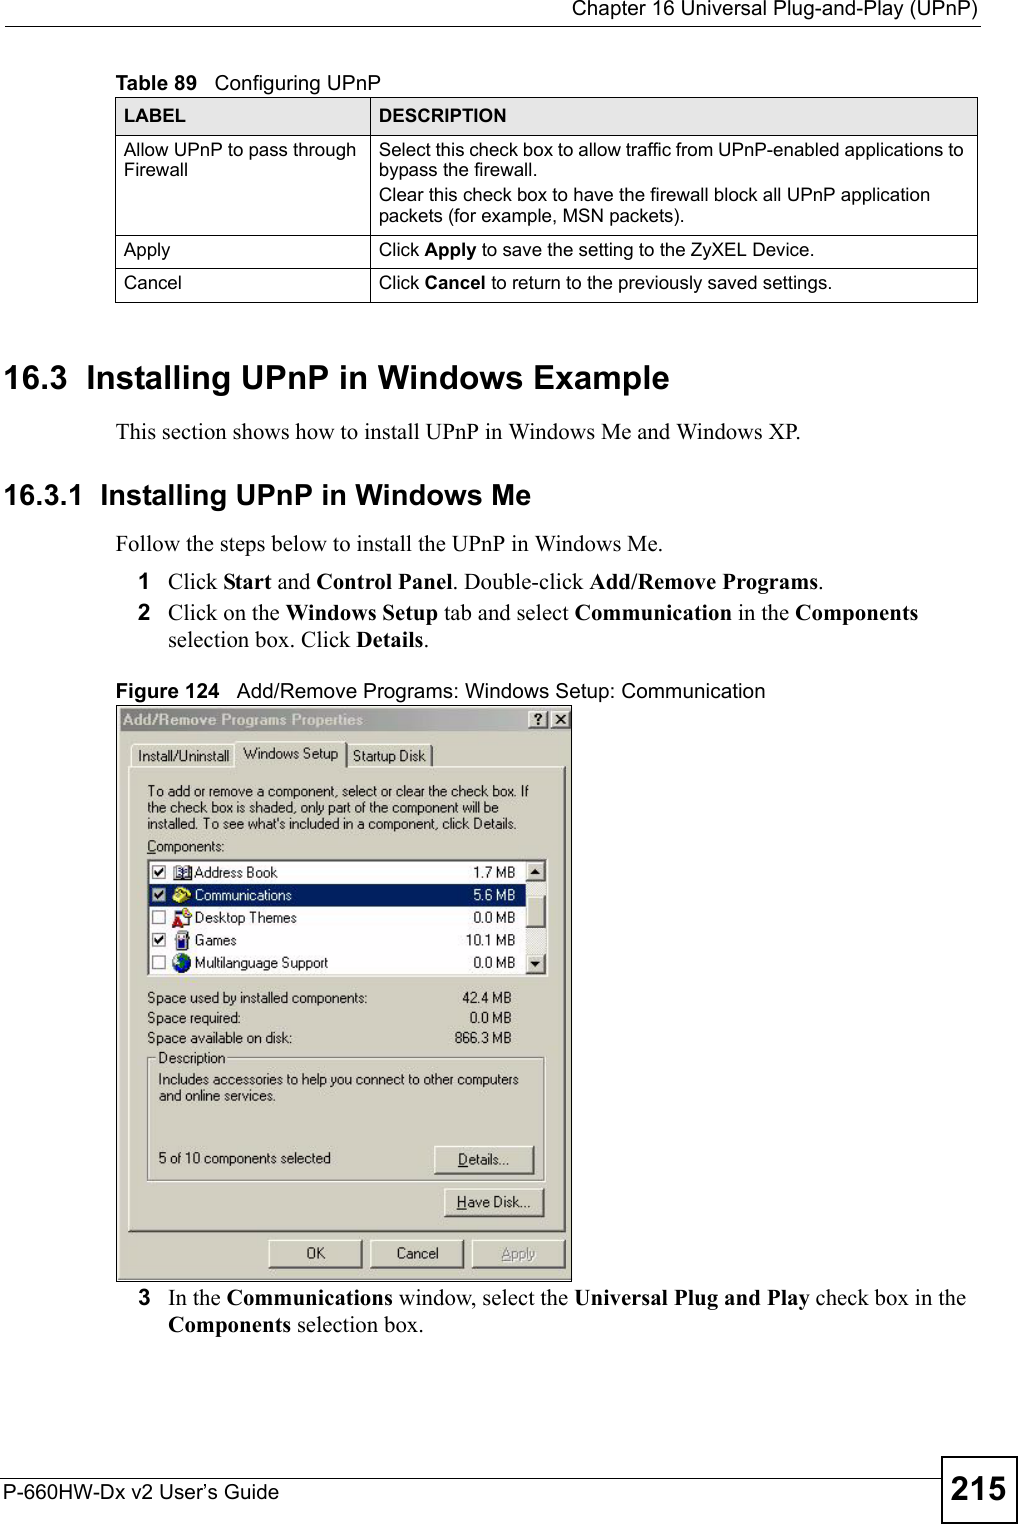  Chapter 16 Universal Plug-and-Play (UPnP)P-660HW-Dx v2 User’s Guide 21516.3  Installing UPnP in Windows ExampleThis section shows how to install UPnP in Windows Me and Windows XP. 16.3.1  Installing UPnP in Windows MeFollow the steps below to install the UPnP in Windows Me. 1Click Start and Control Panel. Double-click Add/Remove Programs.2Click on the Windows Setup tab and select Communication in the Components selection box. Click Details. Figure 124   Add/Remove Programs: Windows Setup: Communication 3In the Communications window, select the Universal Plug and Play check box in the Components selection box. Allow UPnP to pass through FirewallSelect this check box to allow traffic from UPnP-enabled applications to bypass the firewall. Clear this check box to have the firewall block all UPnP application packets (for example, MSN packets). Apply Click Apply to save the setting to the ZyXEL Device.Cancel Click Cancel to return to the previously saved settings.Table 89   Configuring UPnPLABEL DESCRIPTION